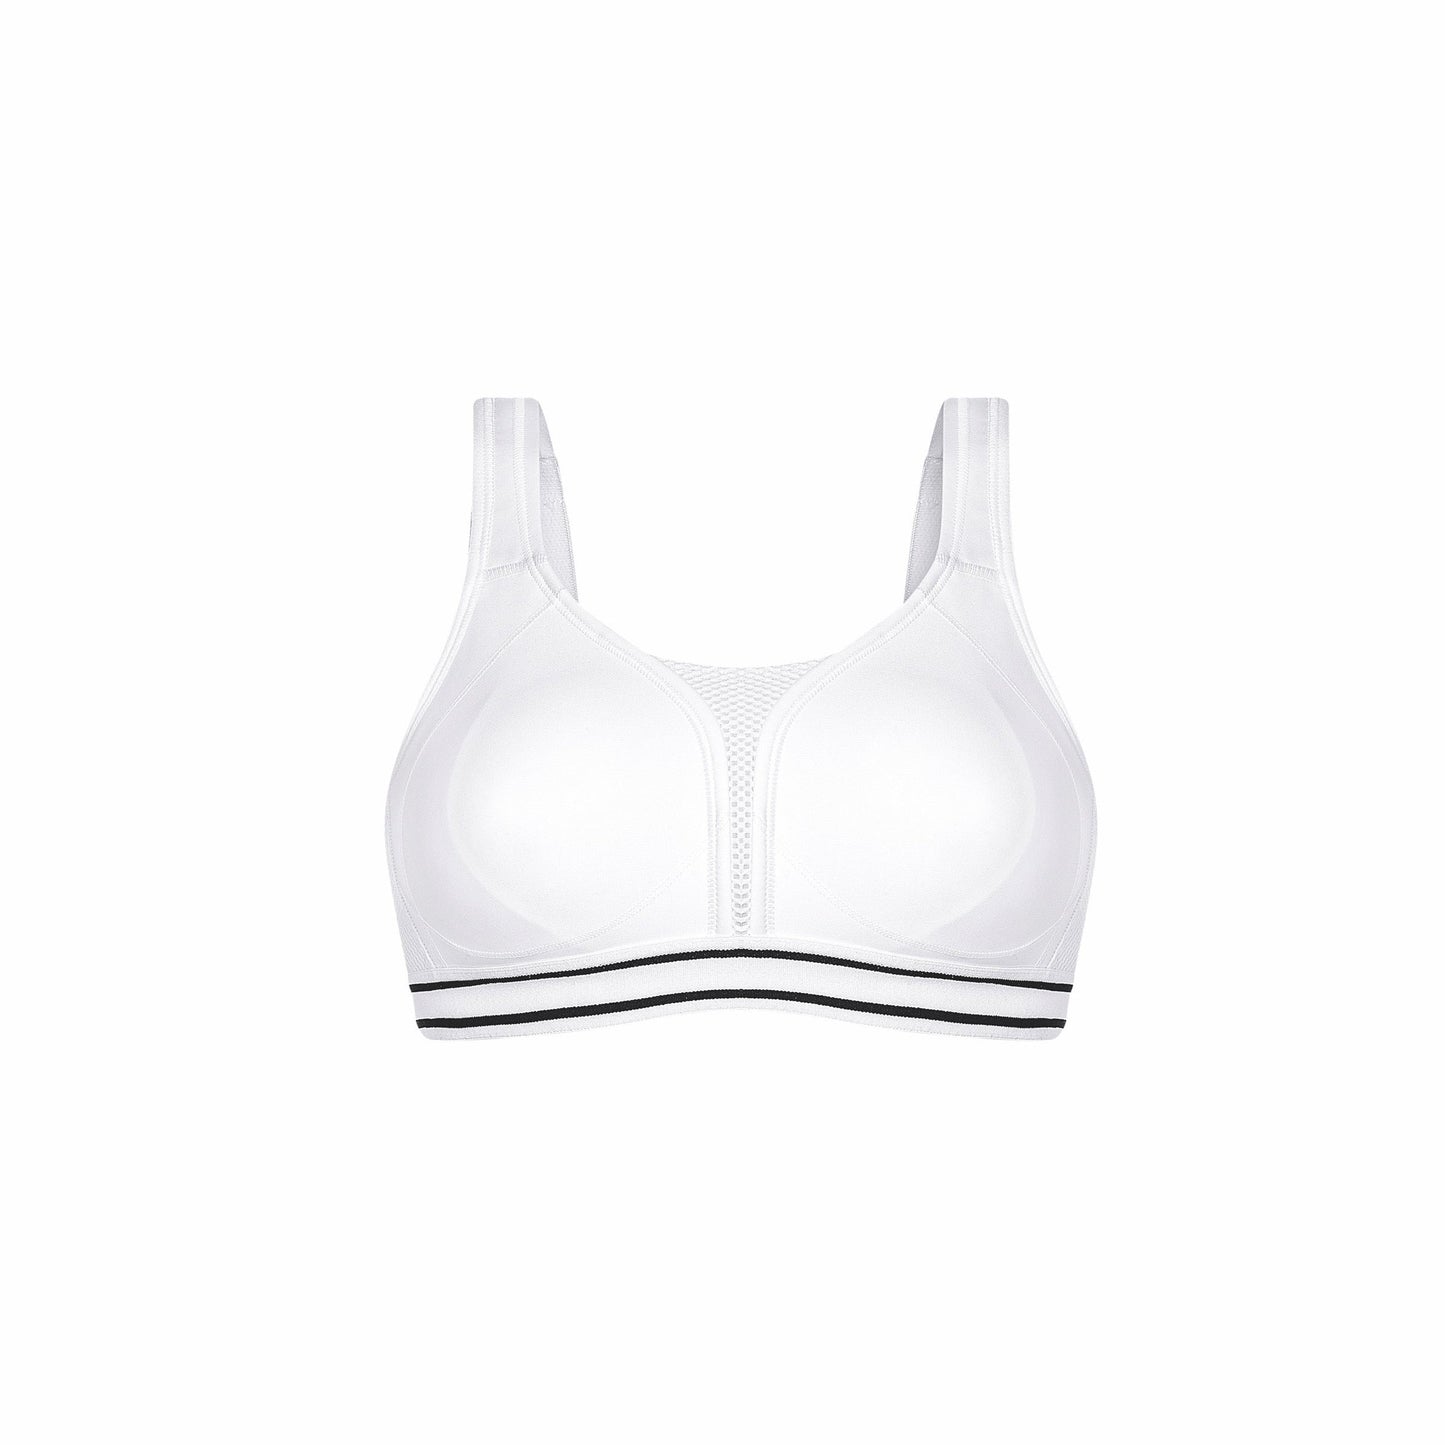 Amoena | Performance Sports Bra | Medium Support, Pocketed. Available in Black & White.